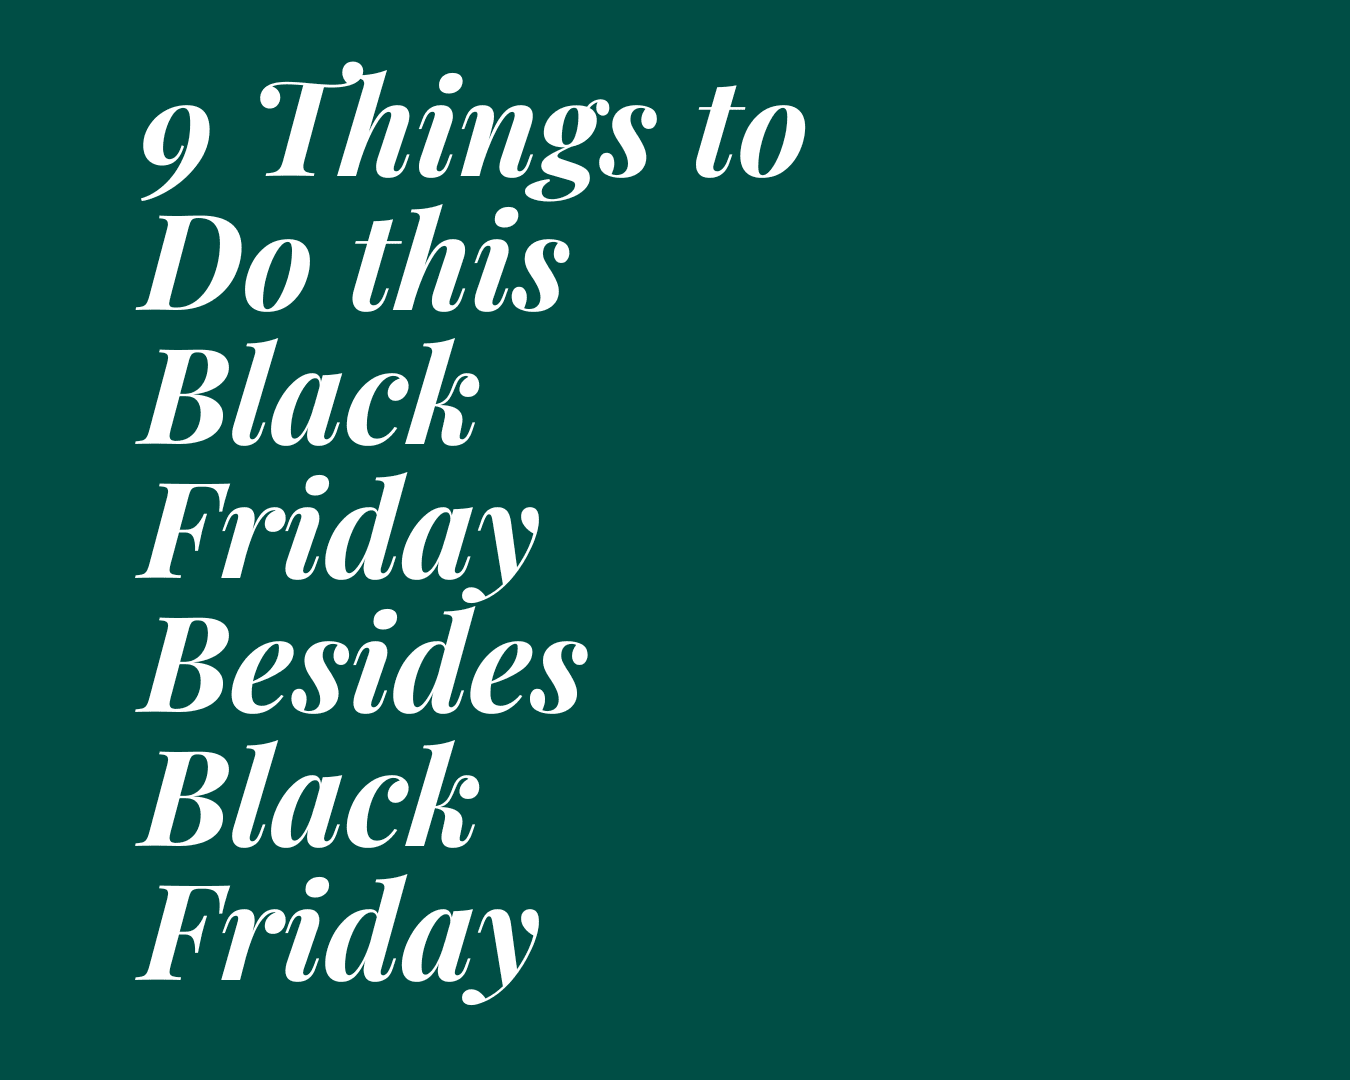 9 Things to Do this Black Friday Besides Black Friday